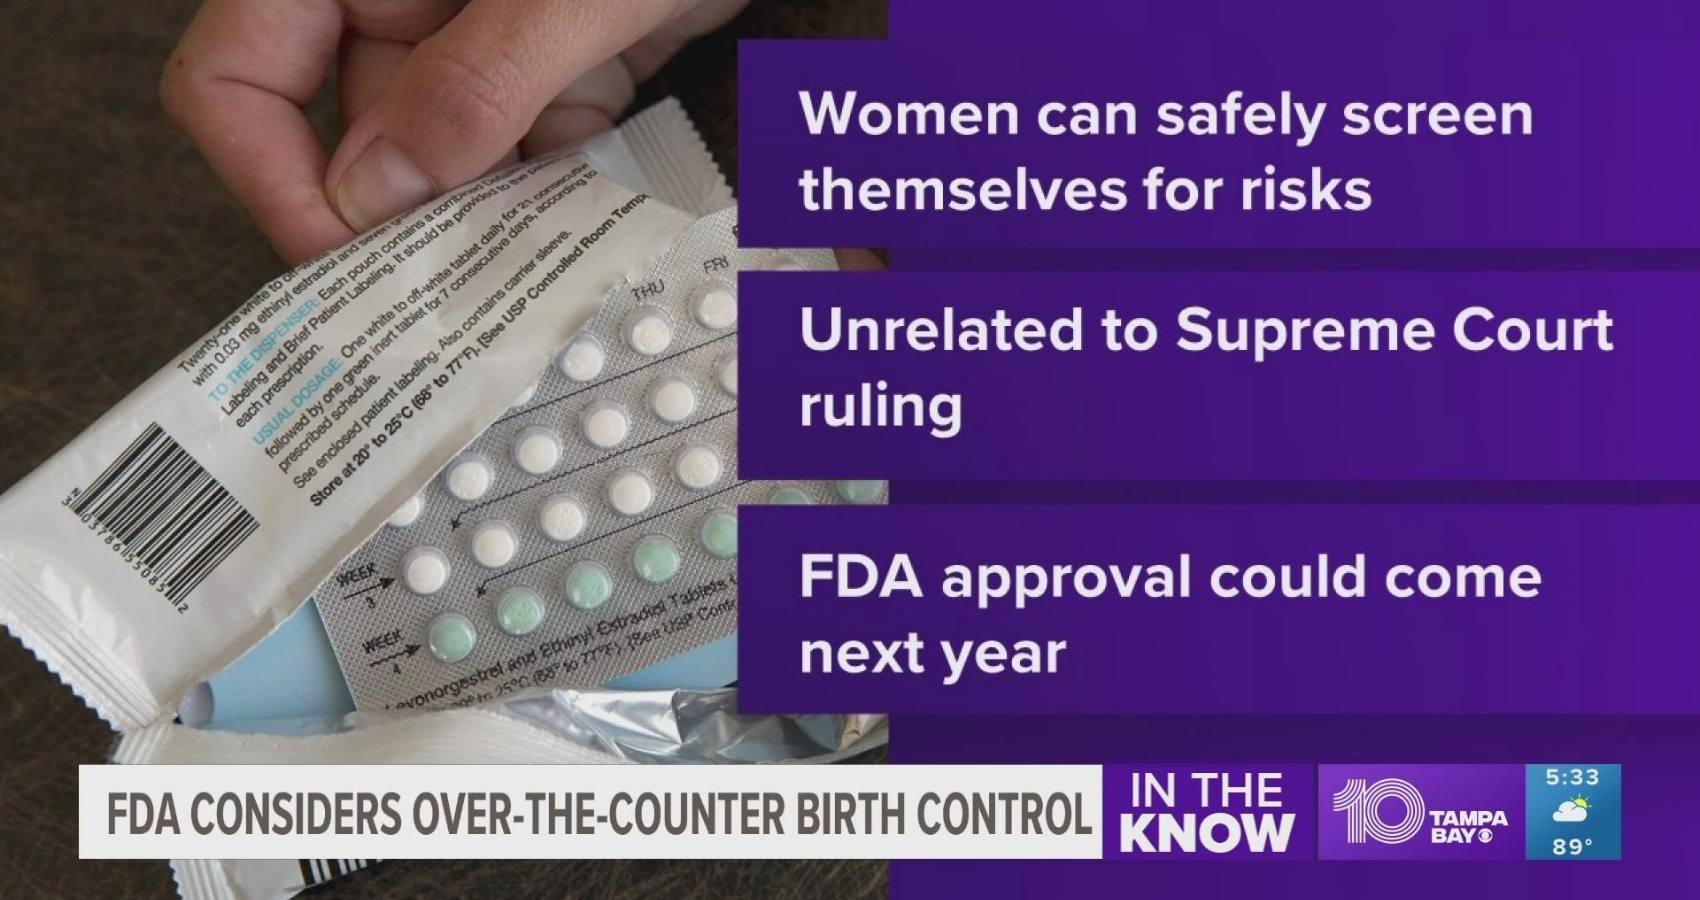 US FDA Likely To Approve Over-The-Counter Birth Control Pill